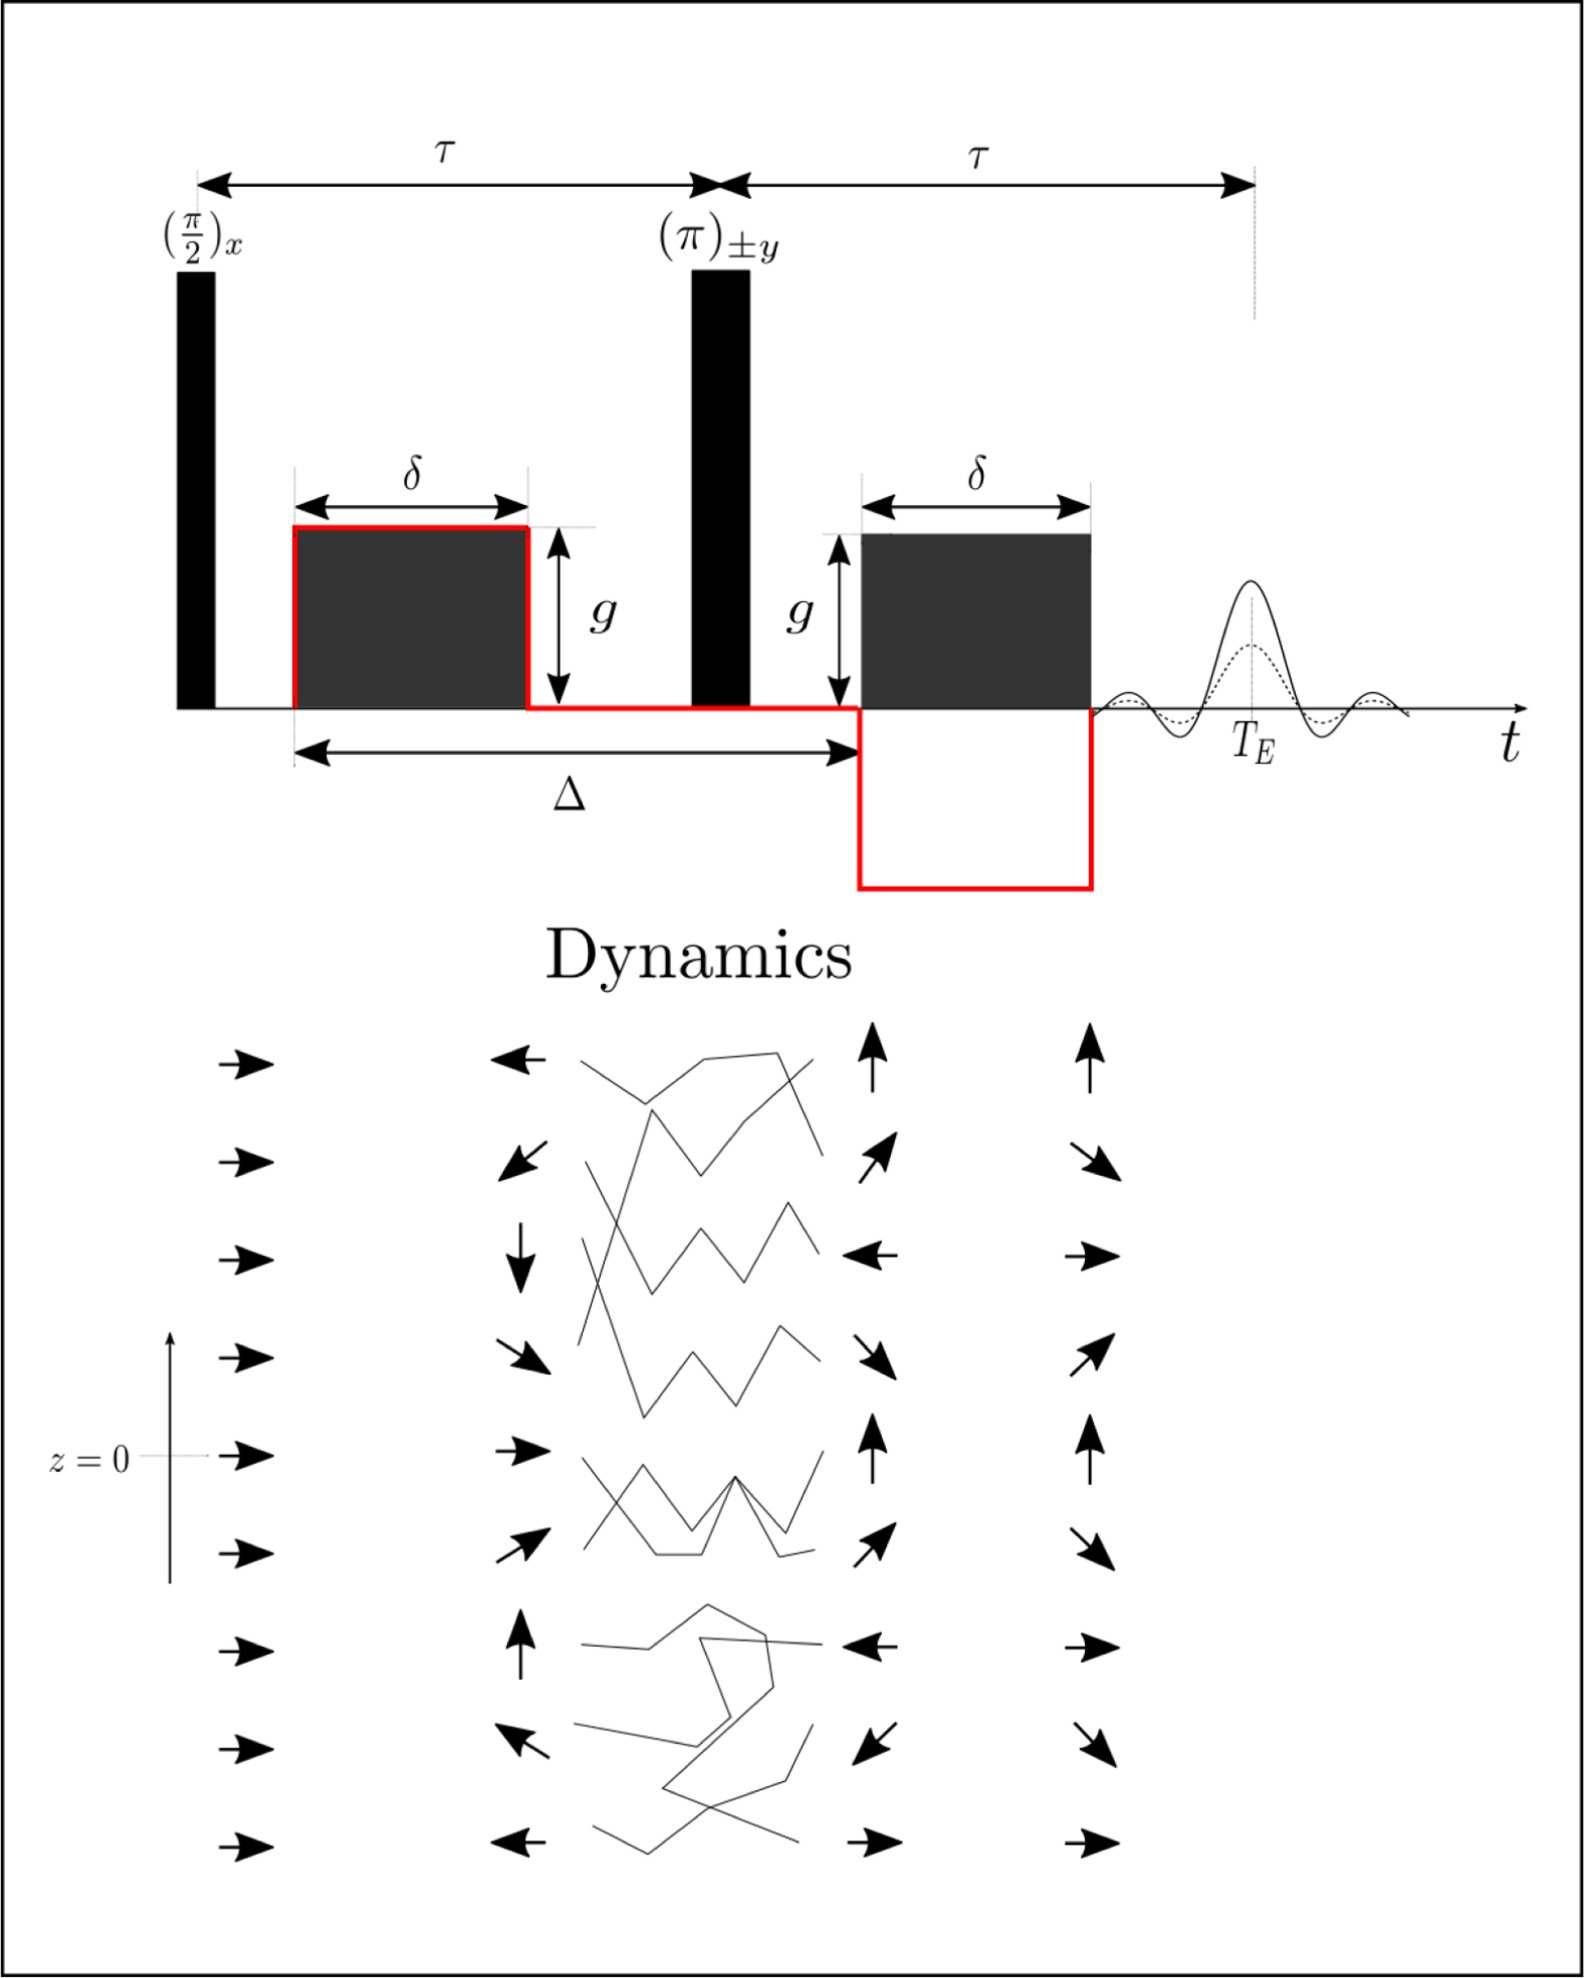 NMR diffusion in restricted environment approached by a fractional Langevin model.